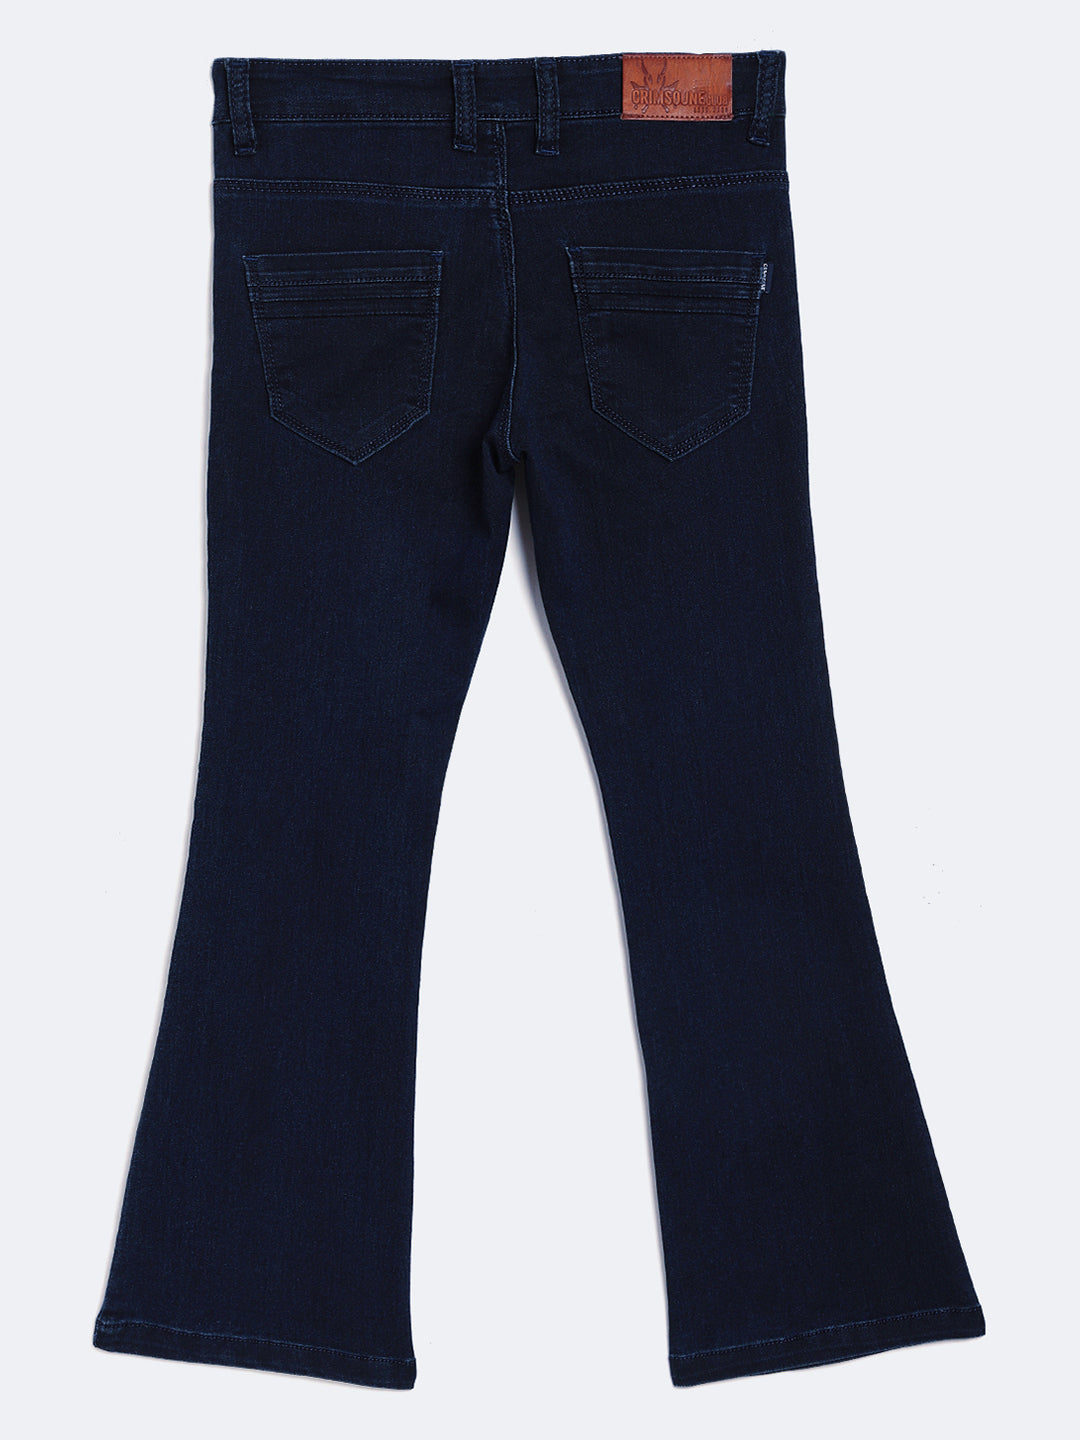 Blue Bootcut Jeans - Girls Jeans